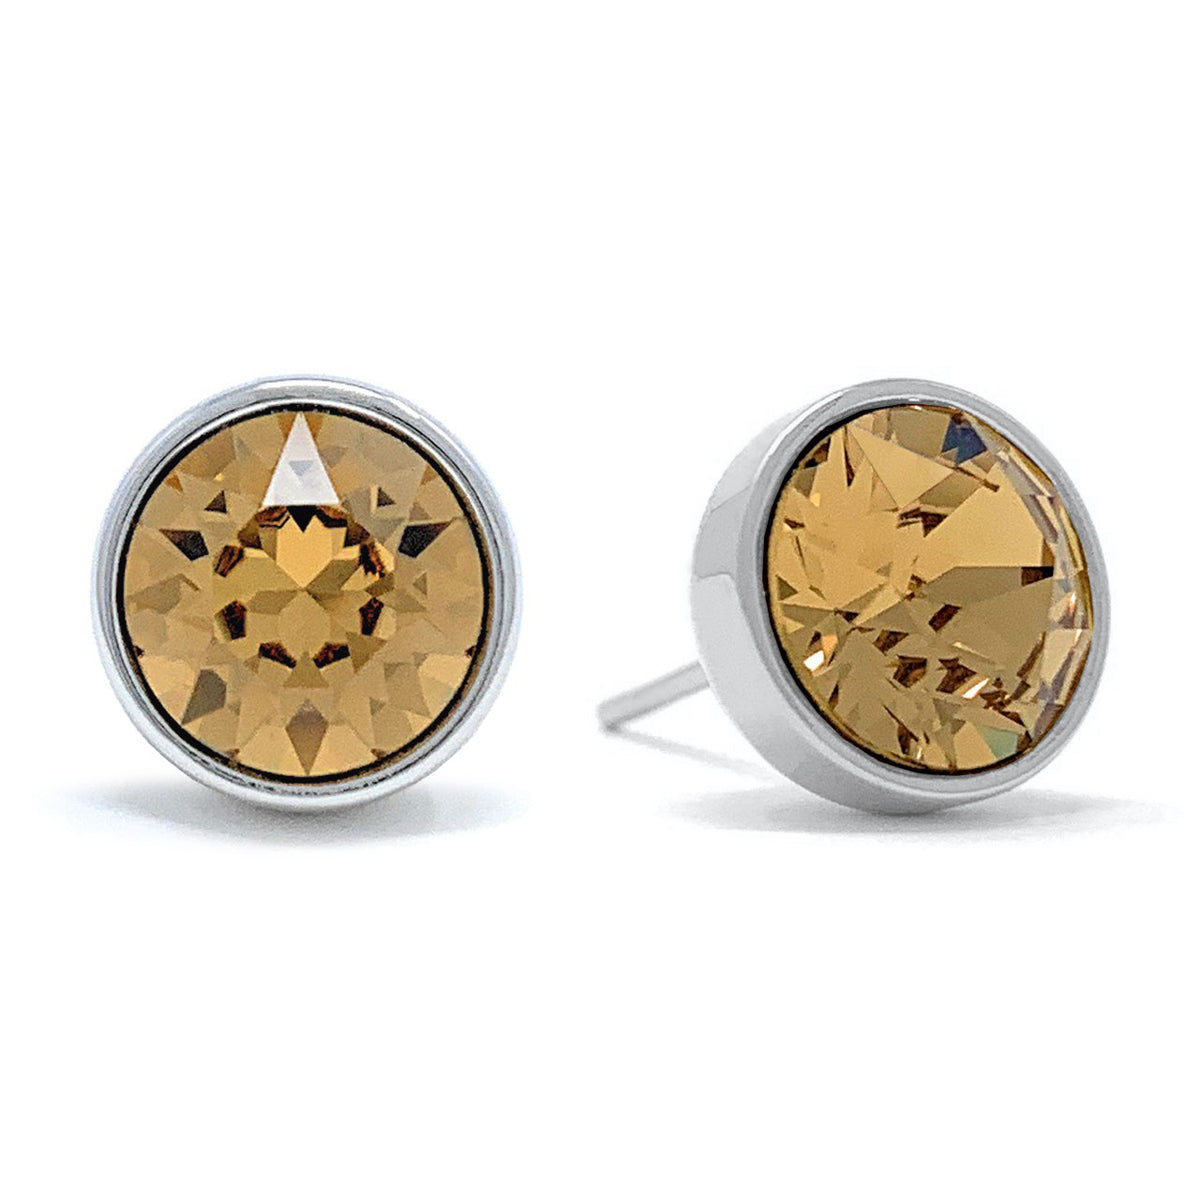 Harley Stud Earrings with Yellow Brown Light Topaz Round Crystals from Swarovski Silver Toned Rhodium Plated - Ed Heart